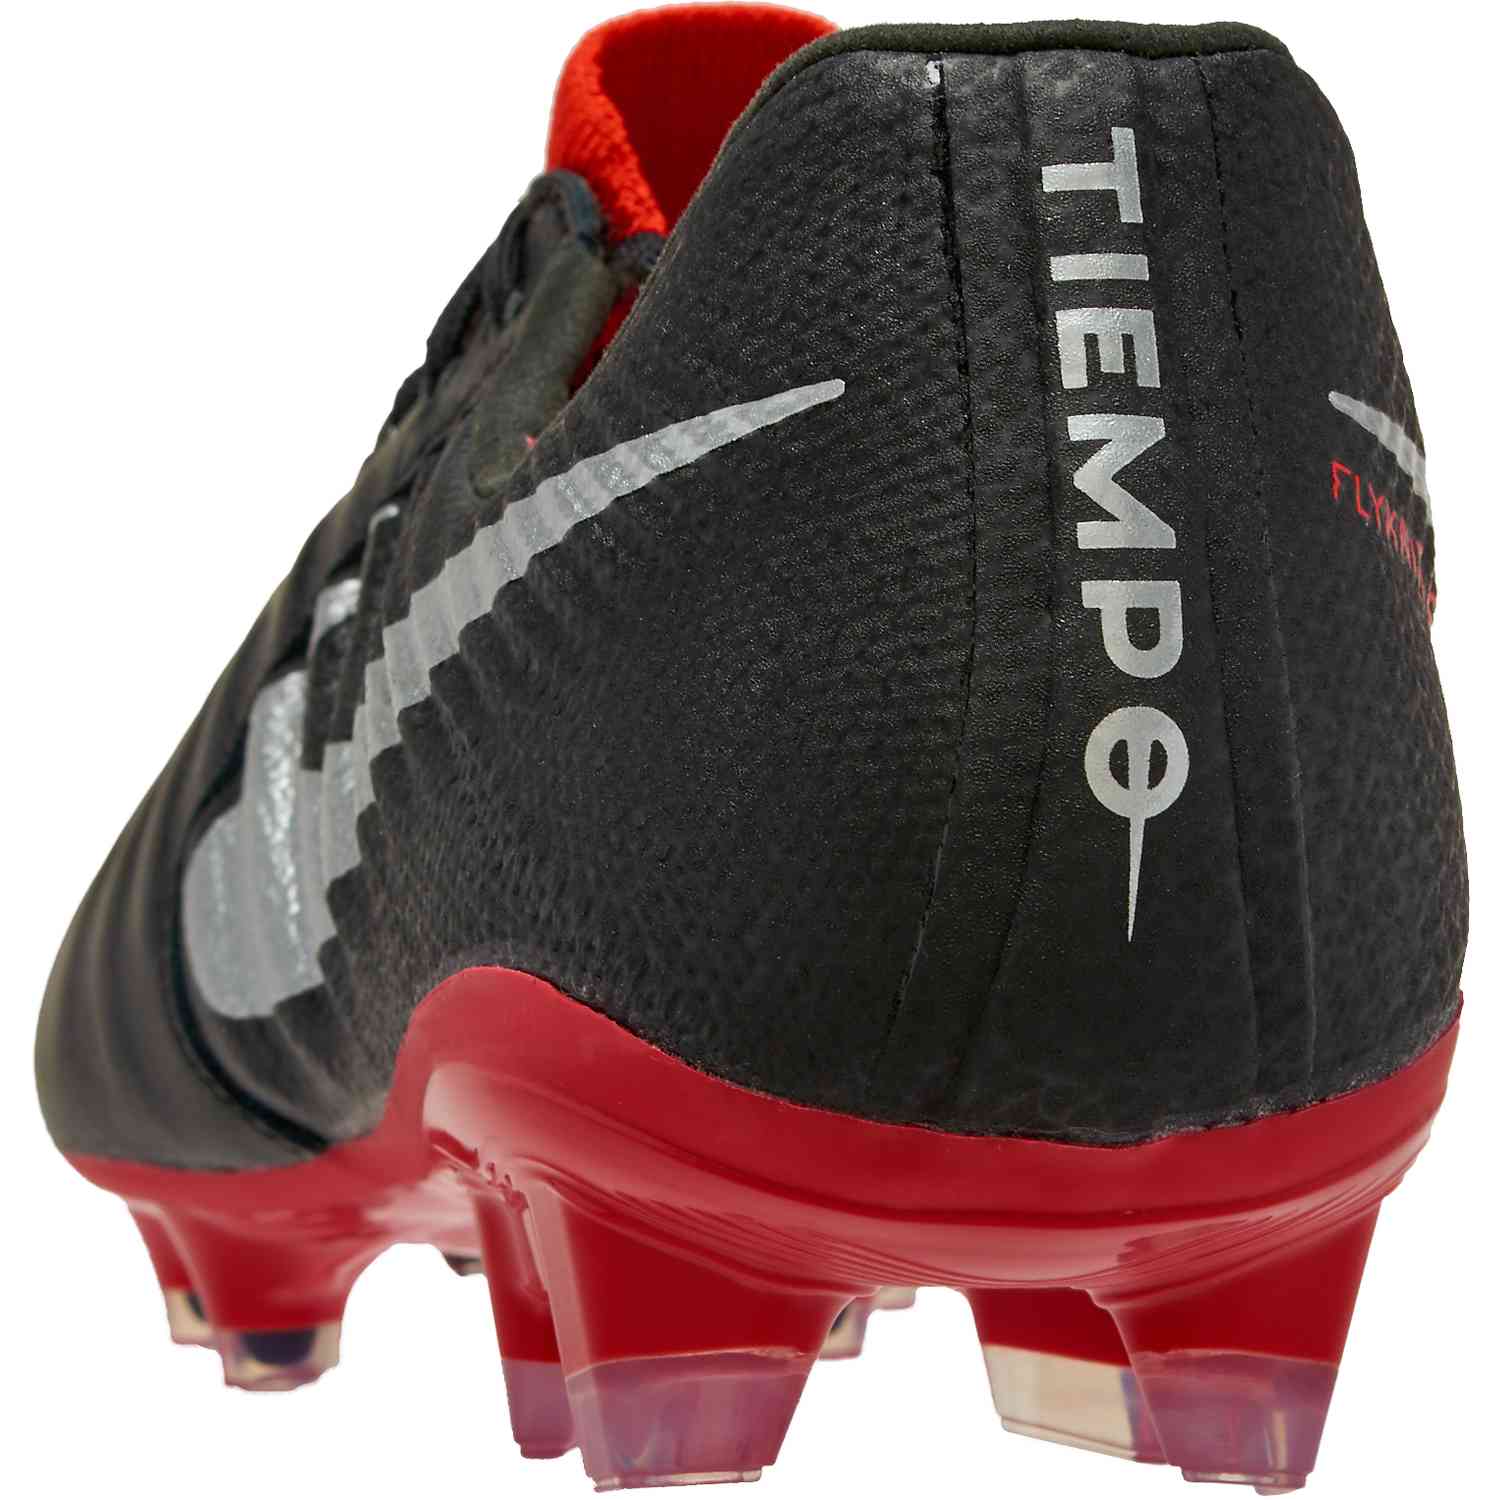 nike tiempo legend 7 black and red